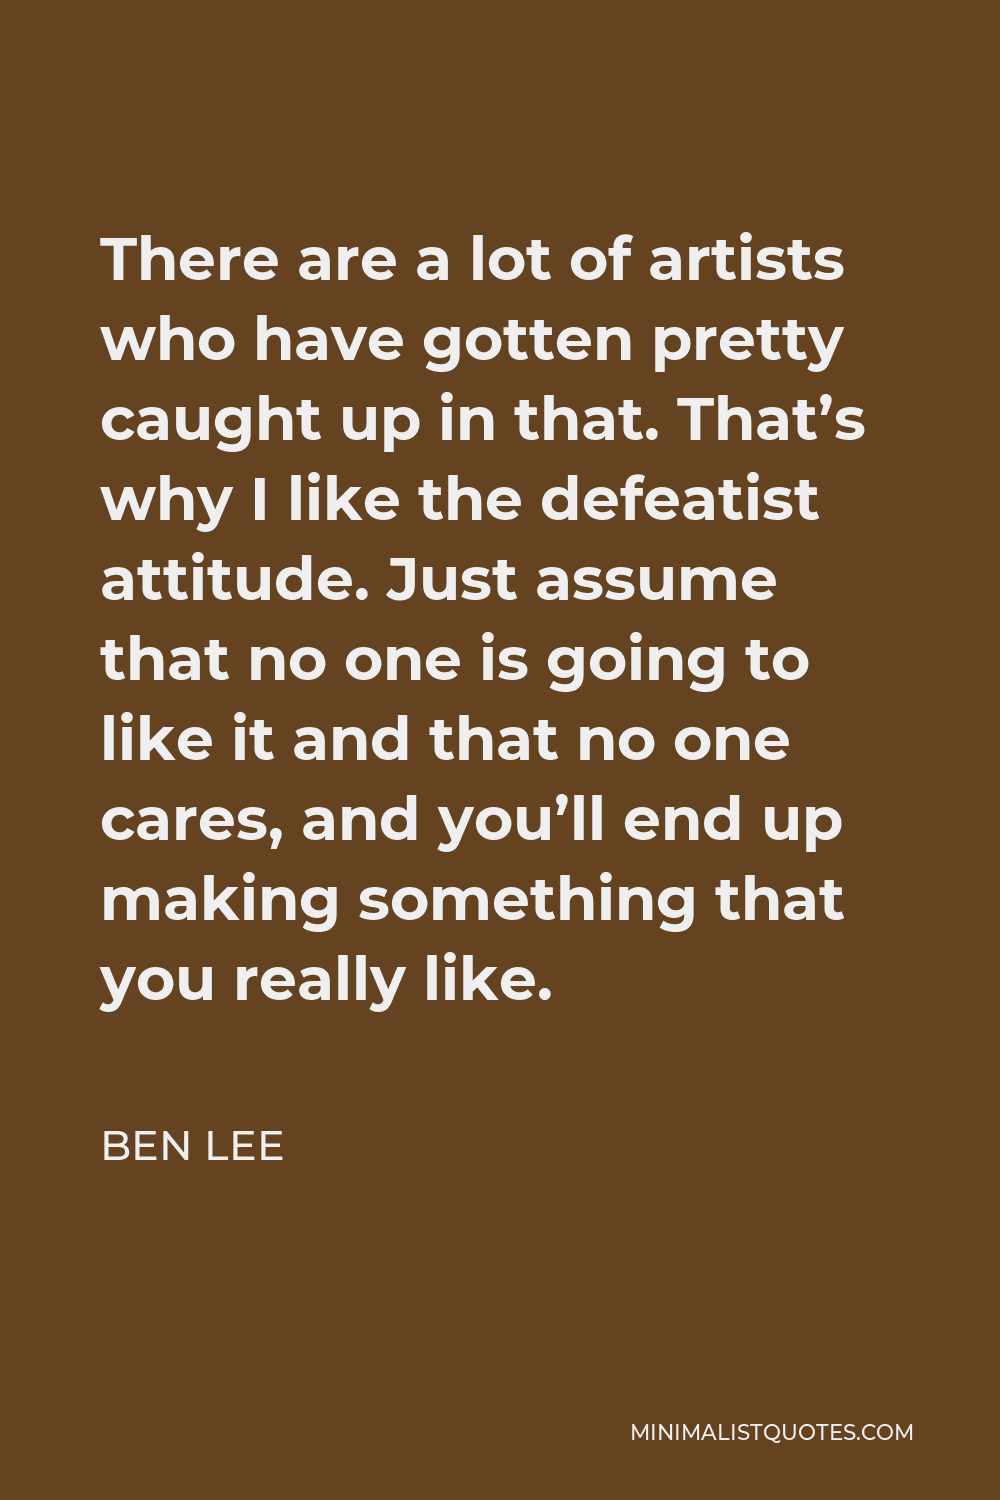 Ben Lee Quote - There are a lot of artists who have gotten pretty caught up in that. That’s why I like the defeatist attitude. Just assume that no one is going to like it and that no one cares, and you’ll end up making something that you really like.